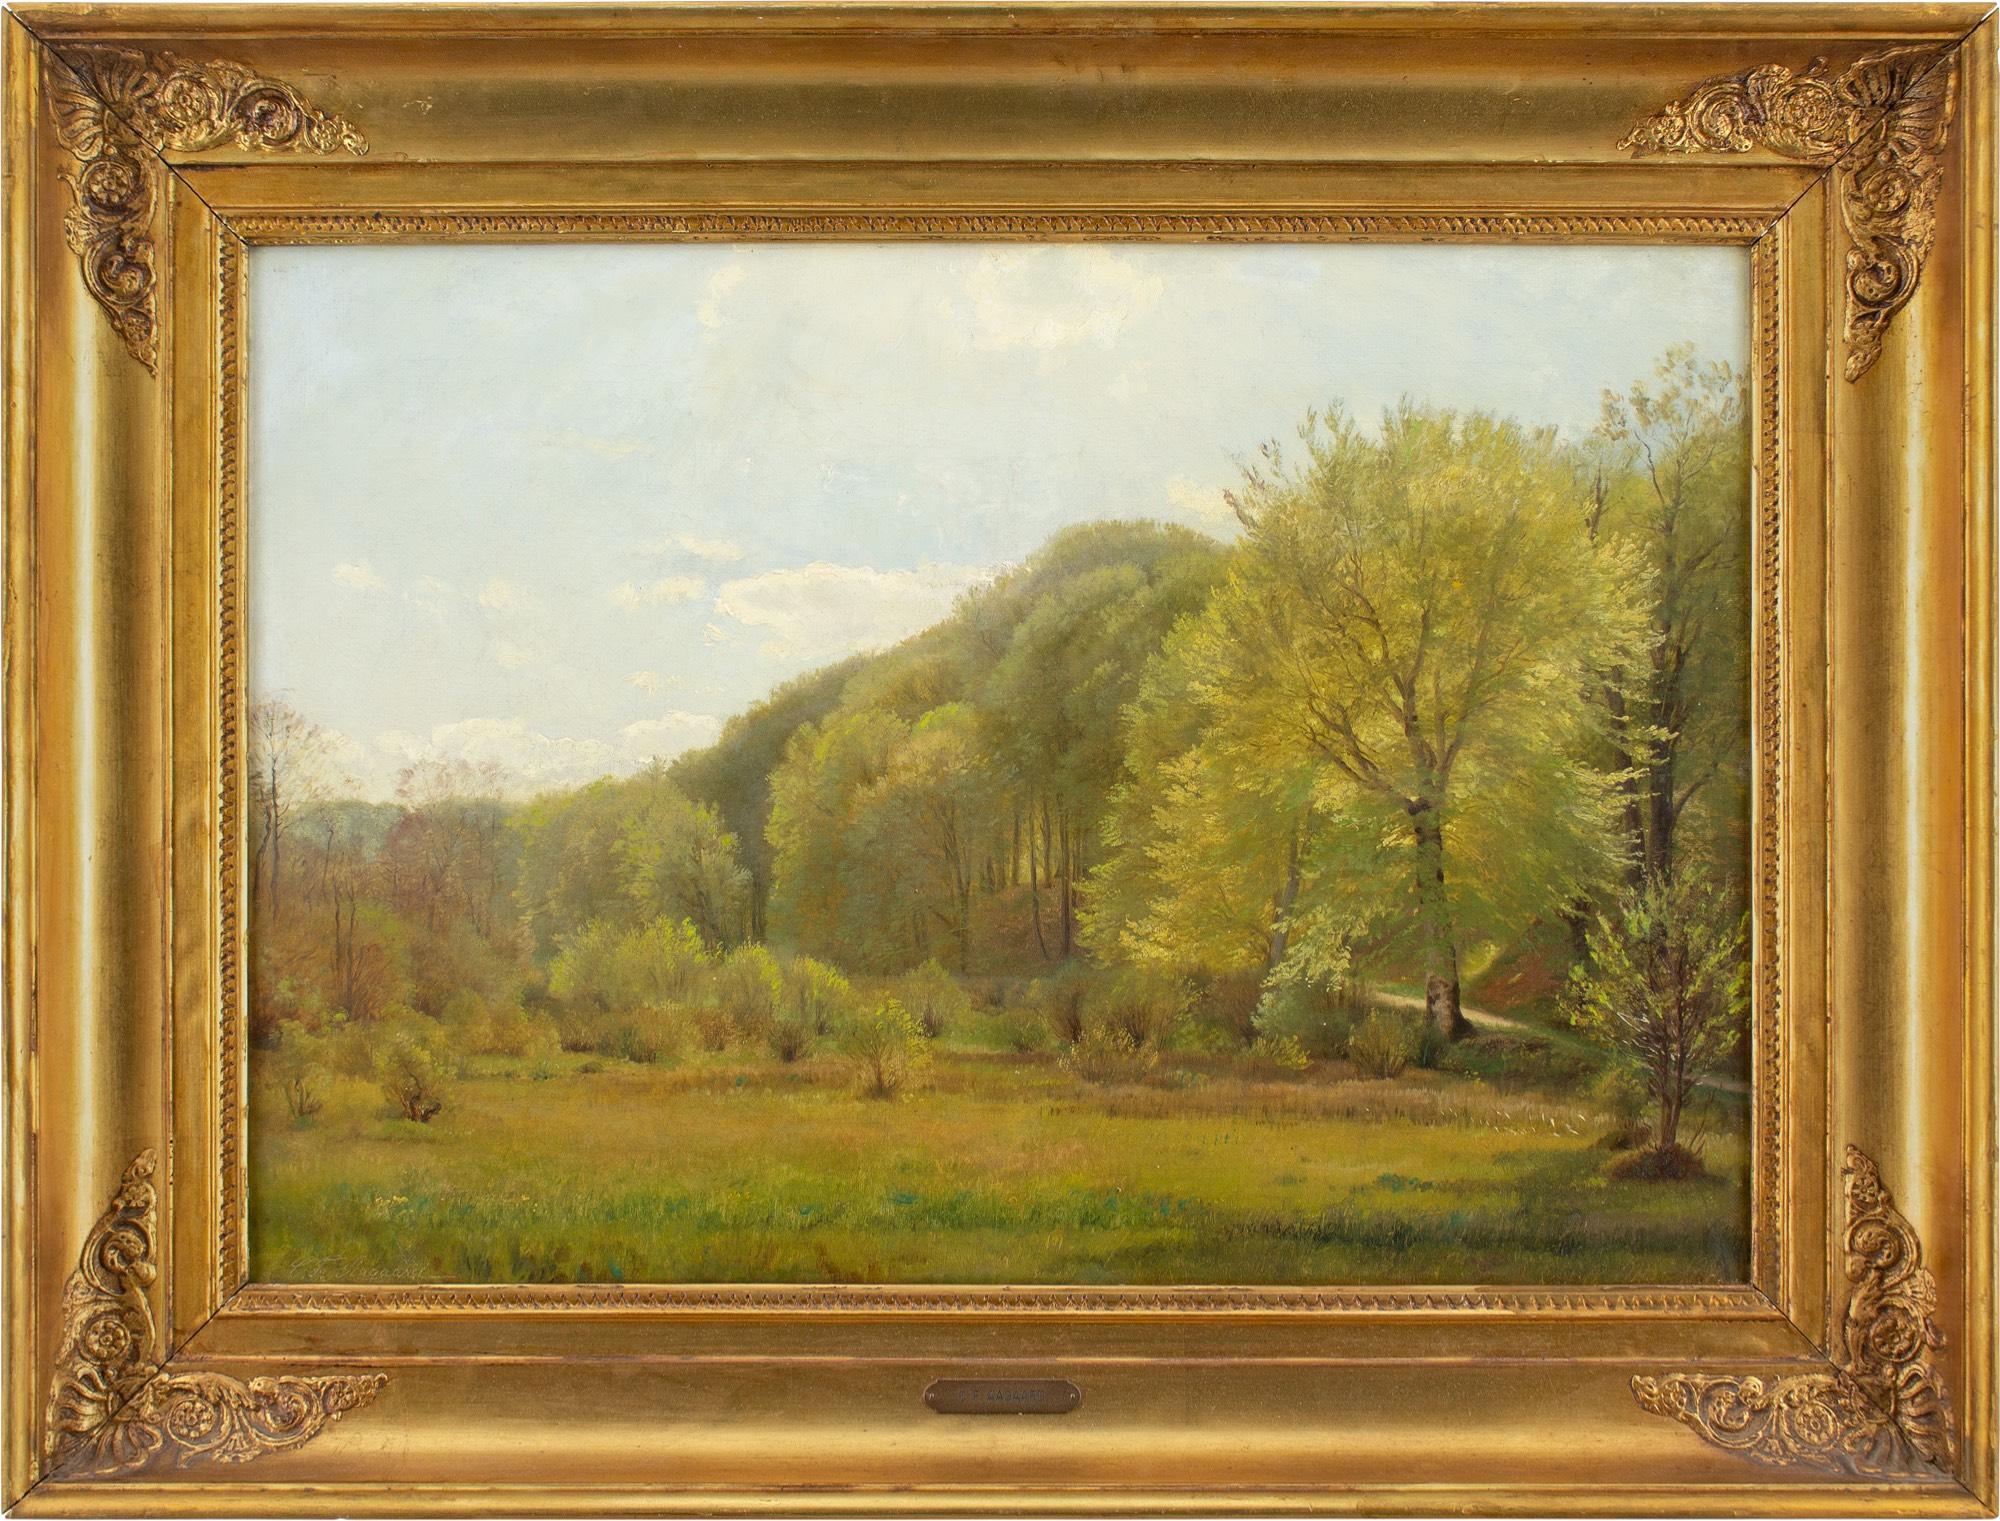 This mid-19th-century oil painting by Danish artist Carl Frederik Aagaard (1833-1895) depicts a leafy view at Dyrehaven (the Deerpark), north of Copenhagen. It’s an accomplished work rendered in gentle tonal shifts.

Born in Odense, the son of a